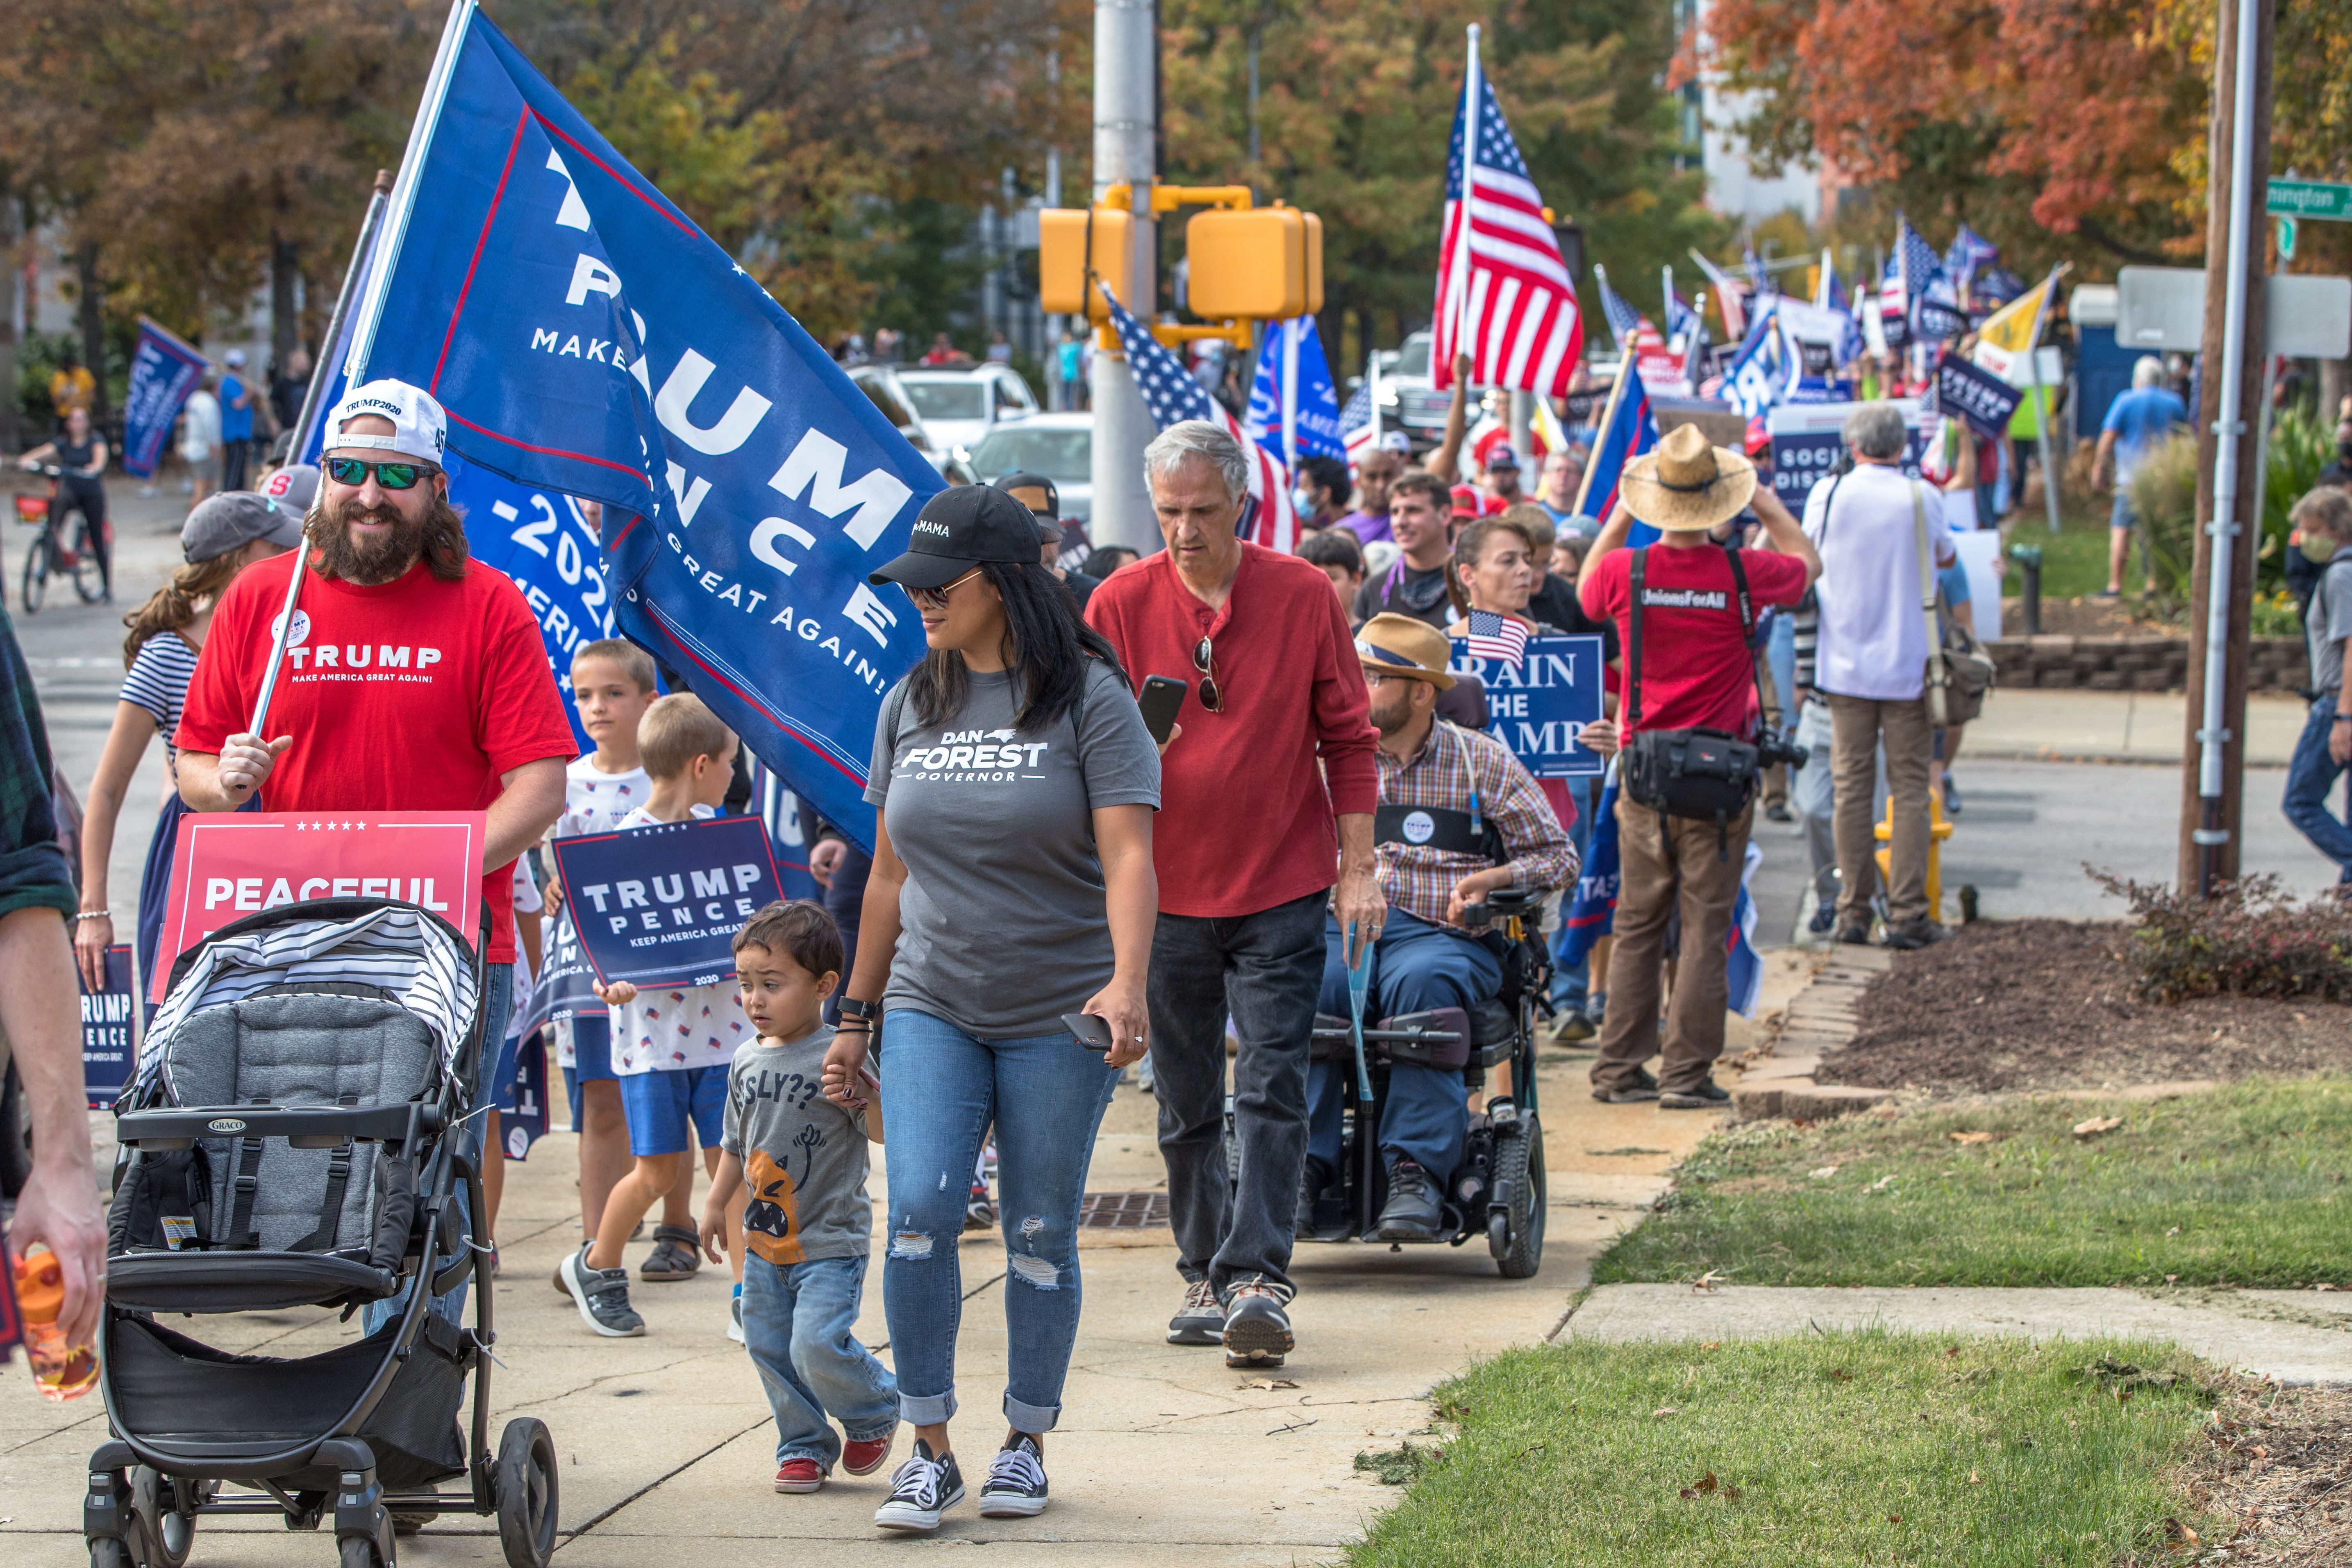 Trump supporters gather in Raleigh, North CArolina